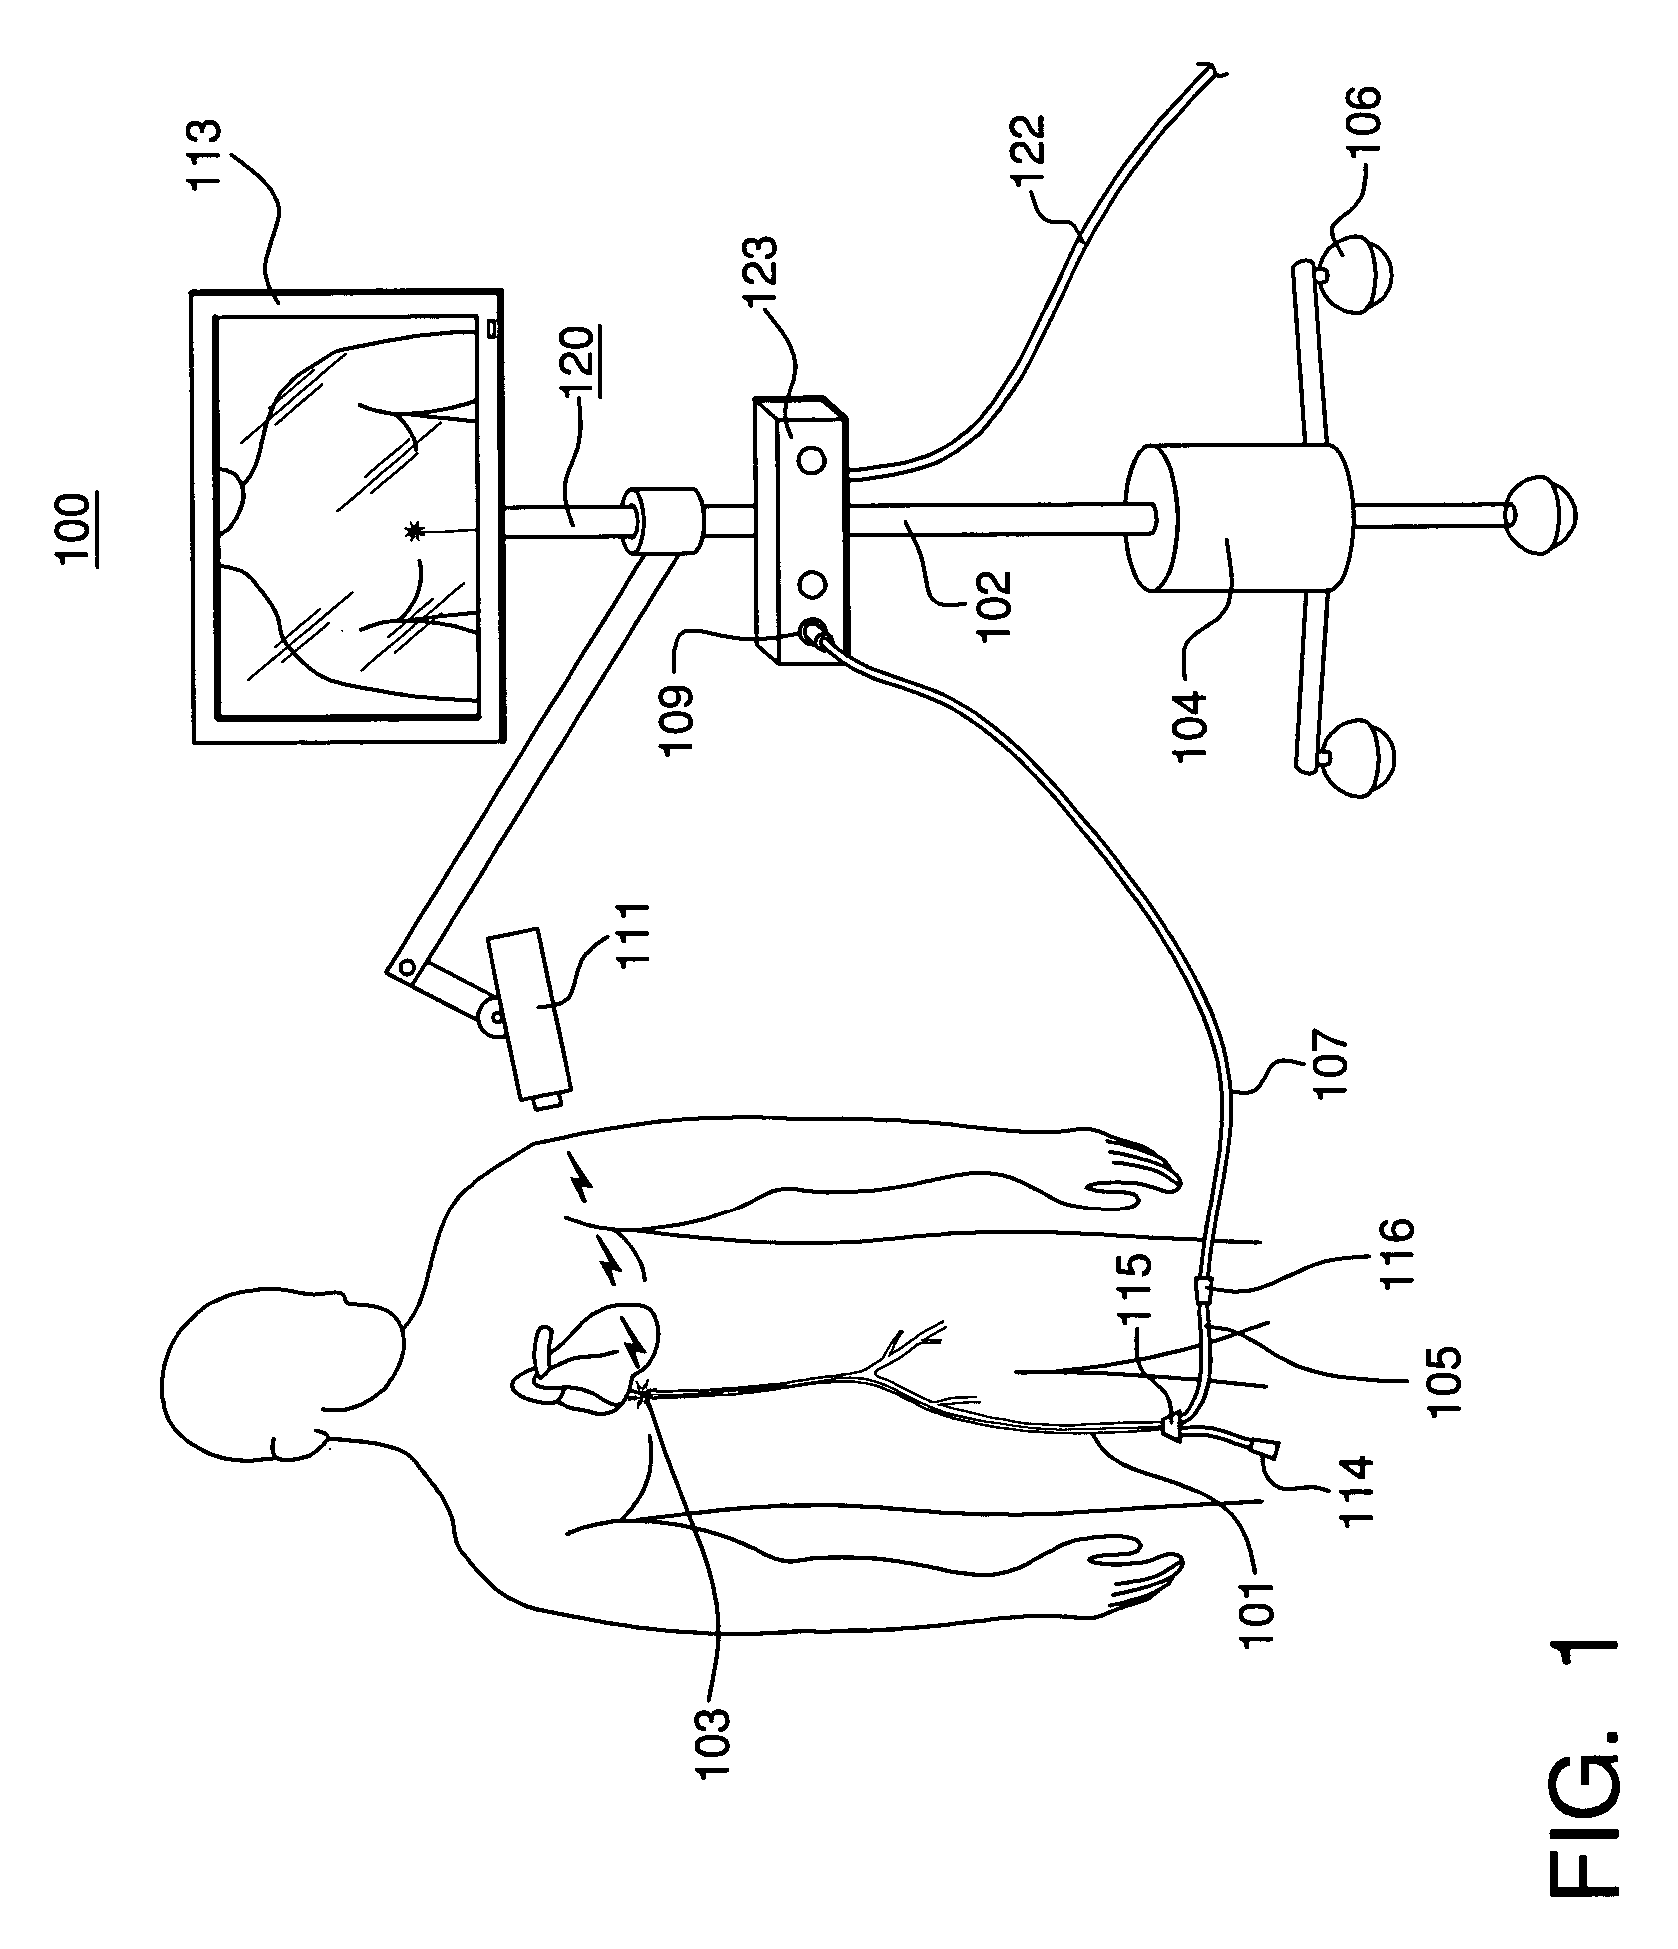 Optically guided system for precise placement of a medical catheter in a patient